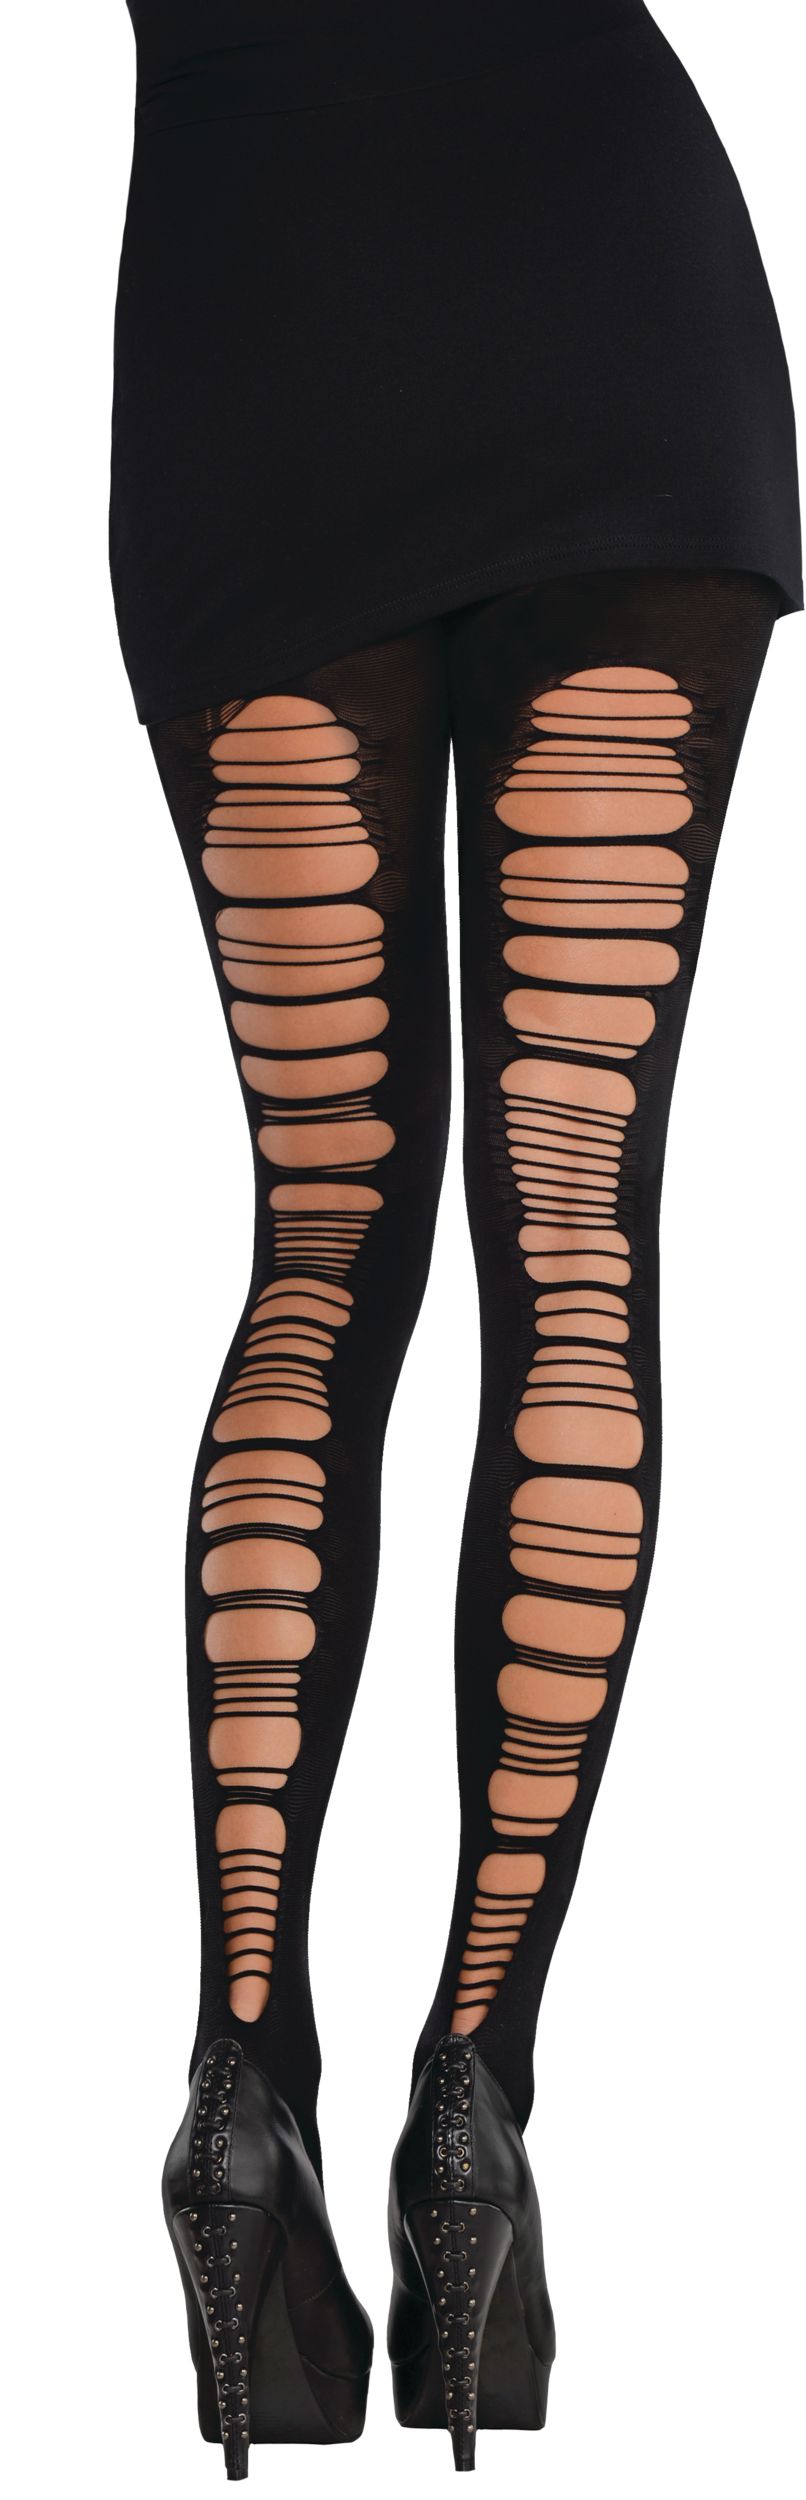 https://media-www.partycity.ca/product/seasonal-gardening/party-city-seasonal/party-city-halloween-and-fall-decor/8519968/ripped-tights-5e532440-4b10-4301-b7a7-9ff7215a1789-jpgrendition.jpg